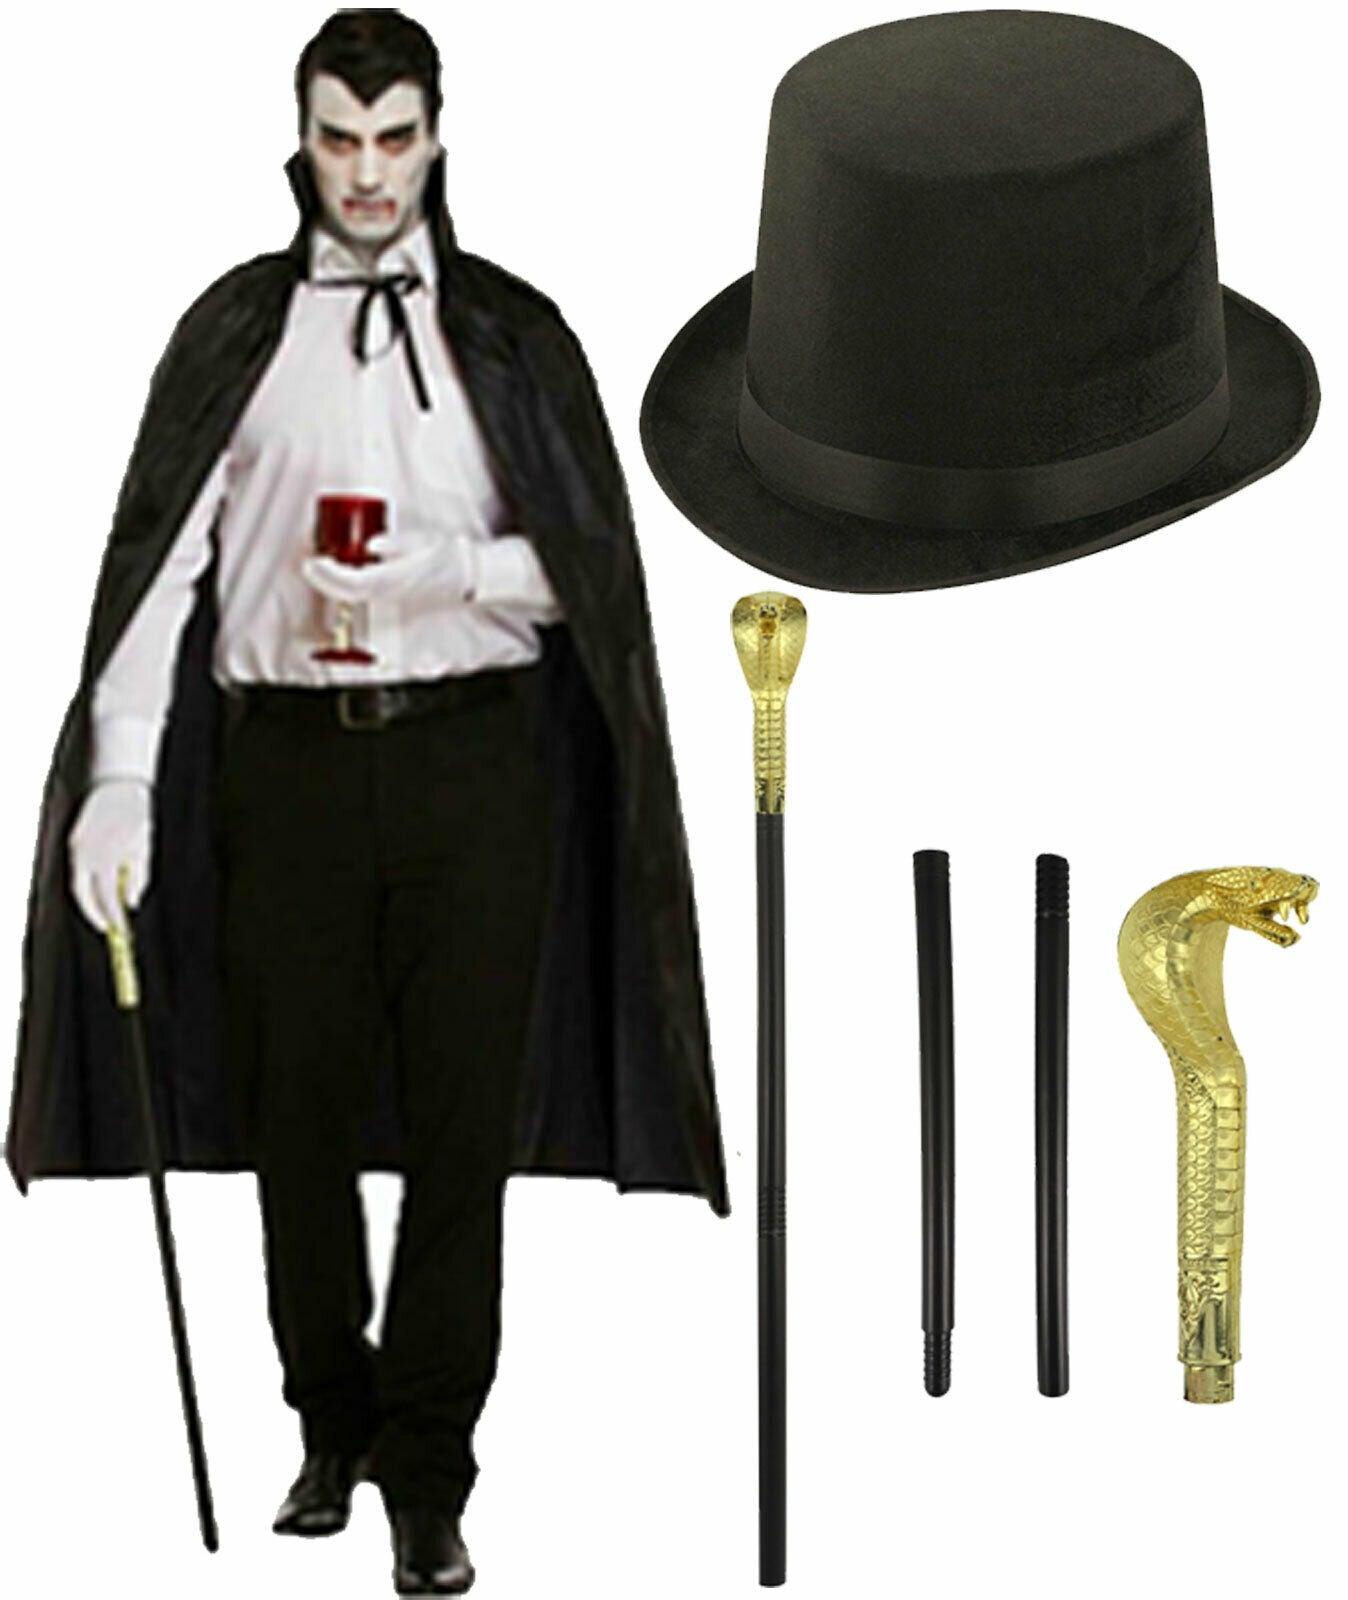 Adults Black Cape Lincoln Top Hat Snake Cane Stick Halloween Party Costume - Labreeze